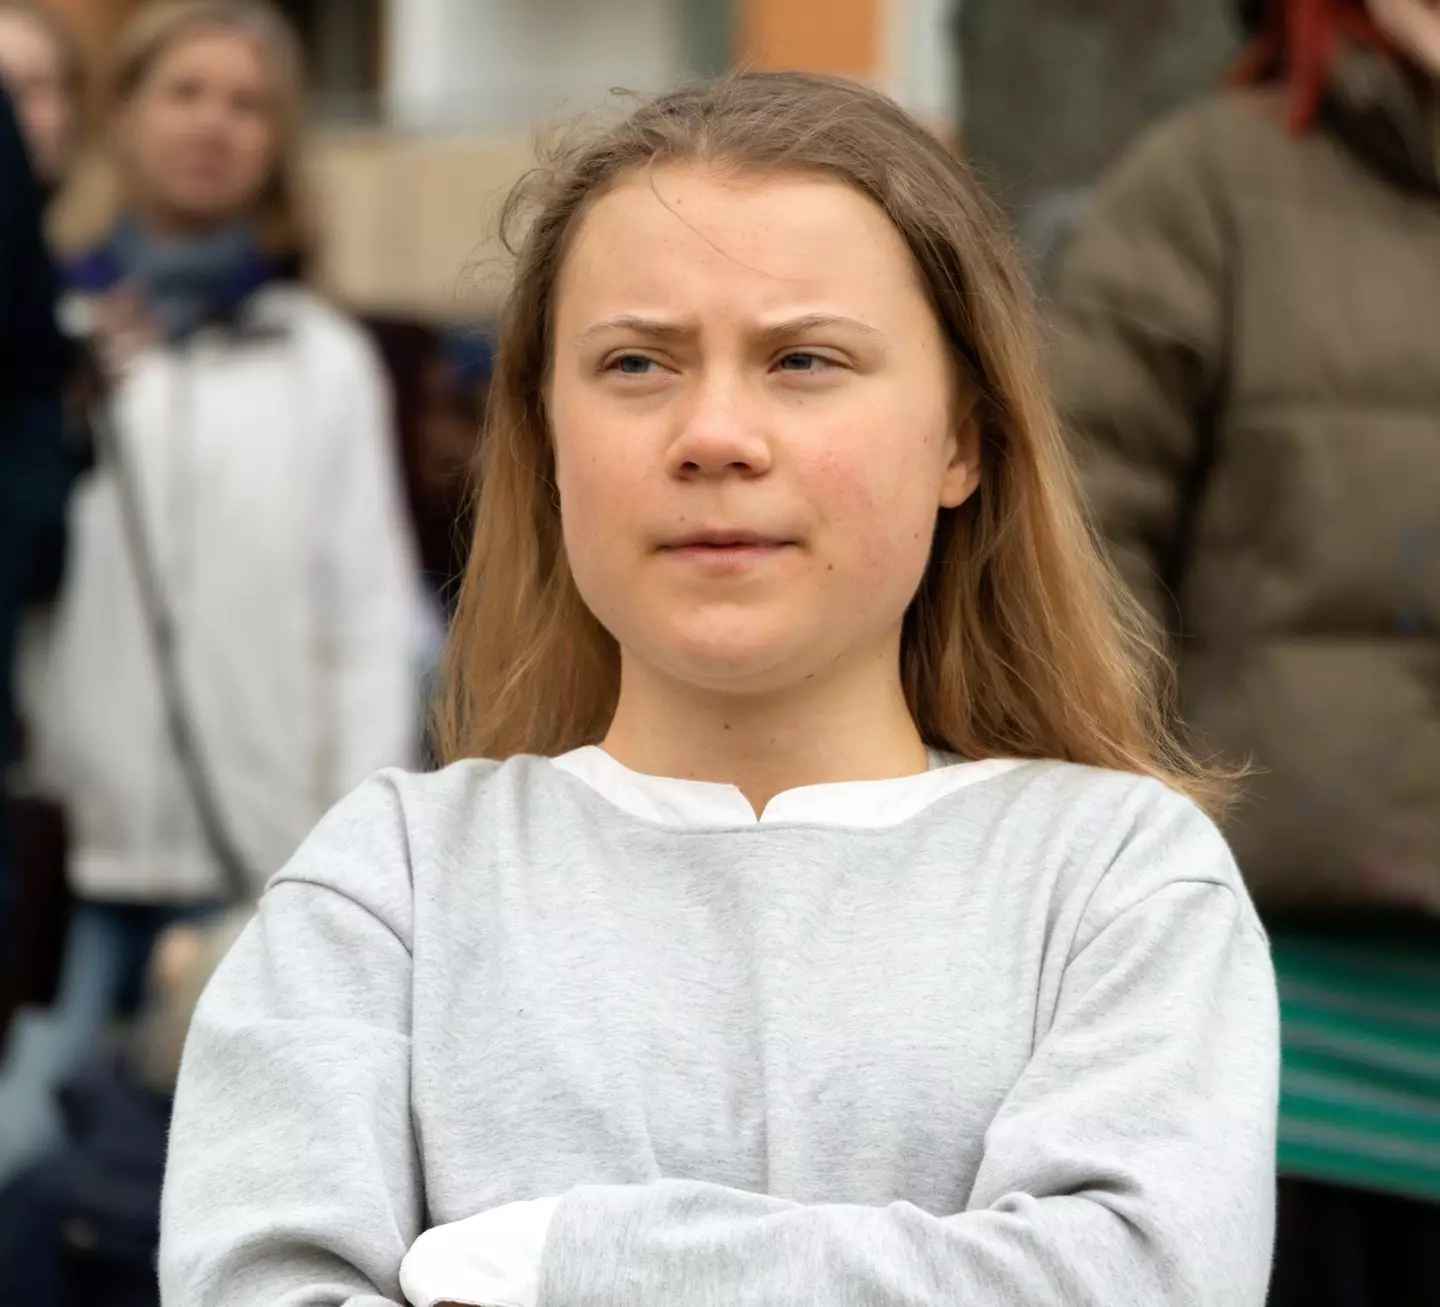 Greta Thunberg has also gained a lot of followers following the Twitter spat.